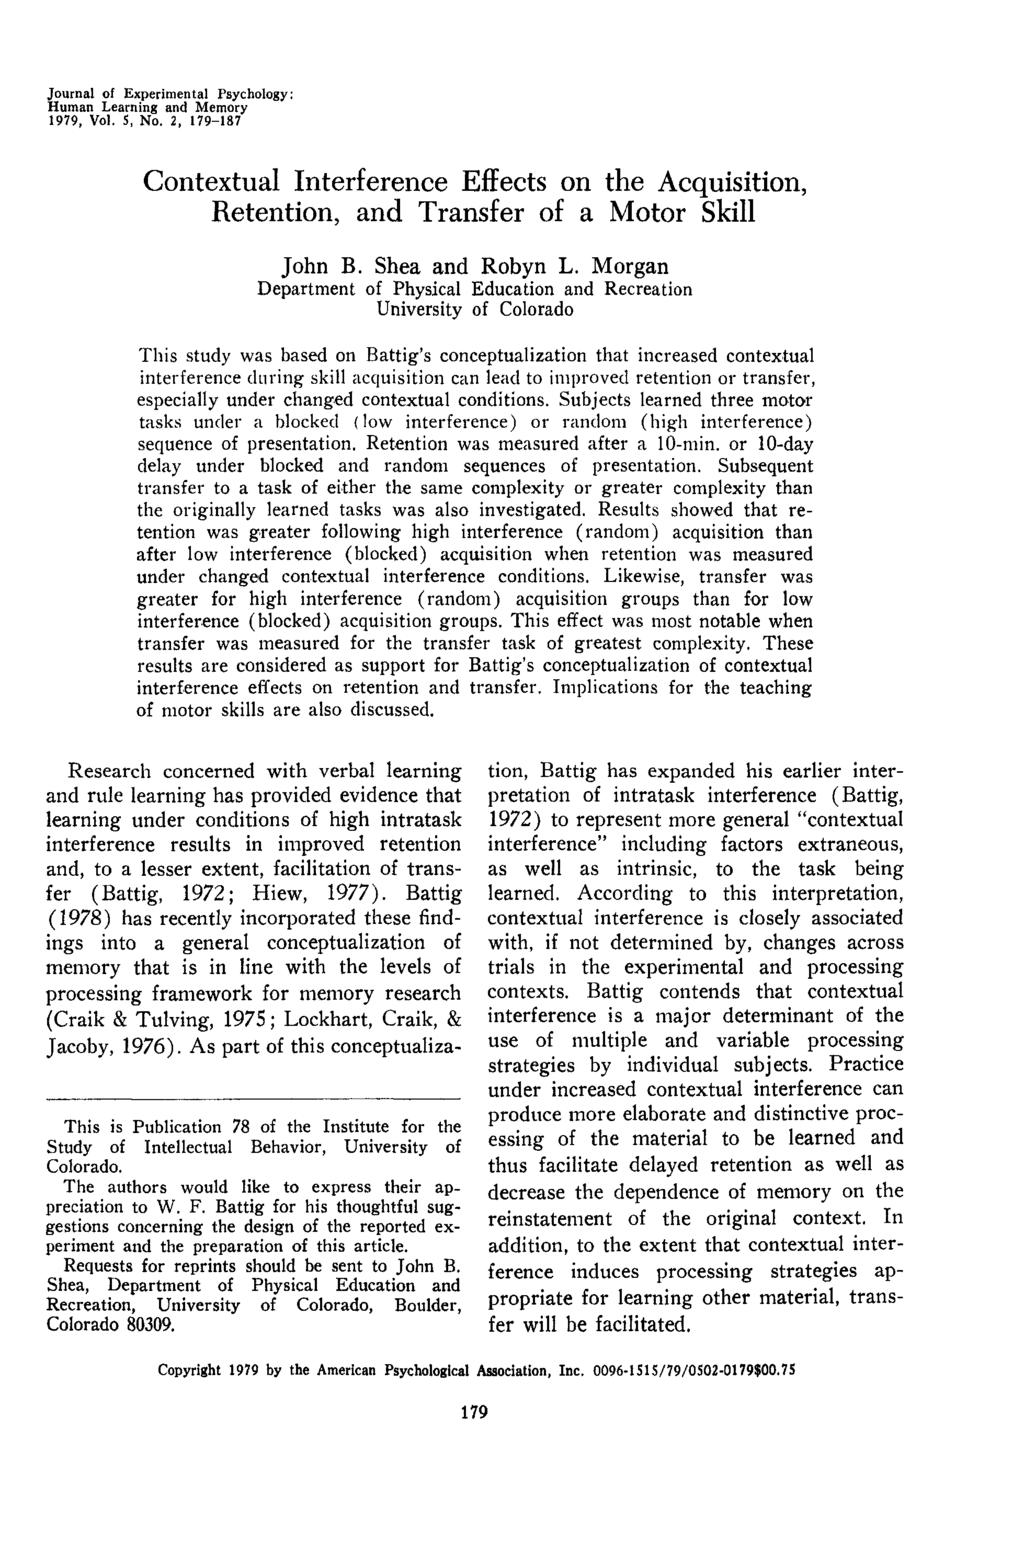 Journal of Experimental Psychology: Human Learning and Memory 1979, Vol. S, No. 2, 179-187 Contextual Interference Effects on the Acquisition, Retention, and Transfer of a Motor Skill John B.